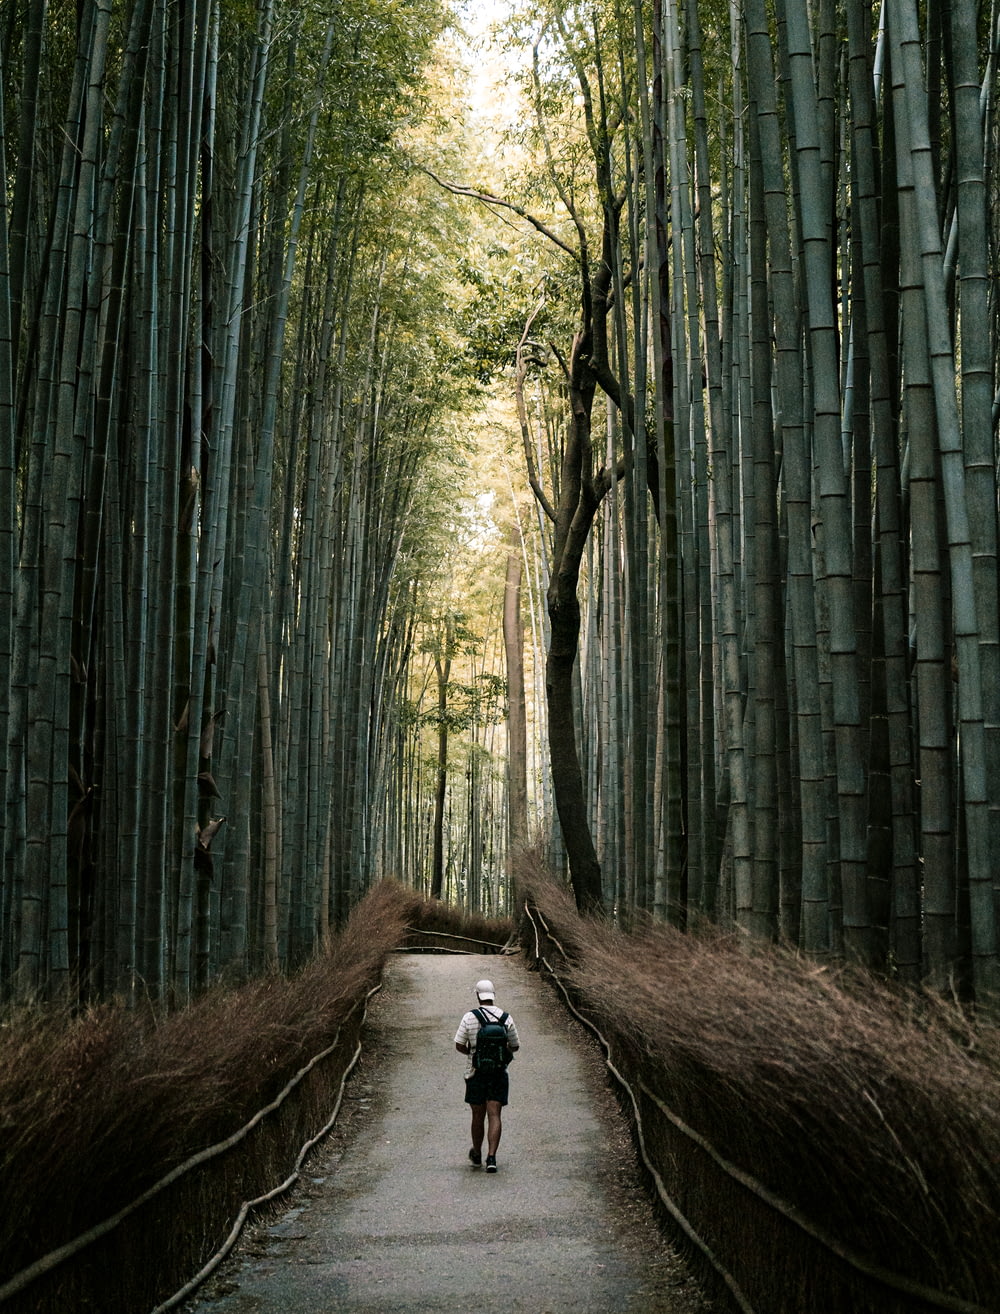 a person walking down a path in a bamboo forest